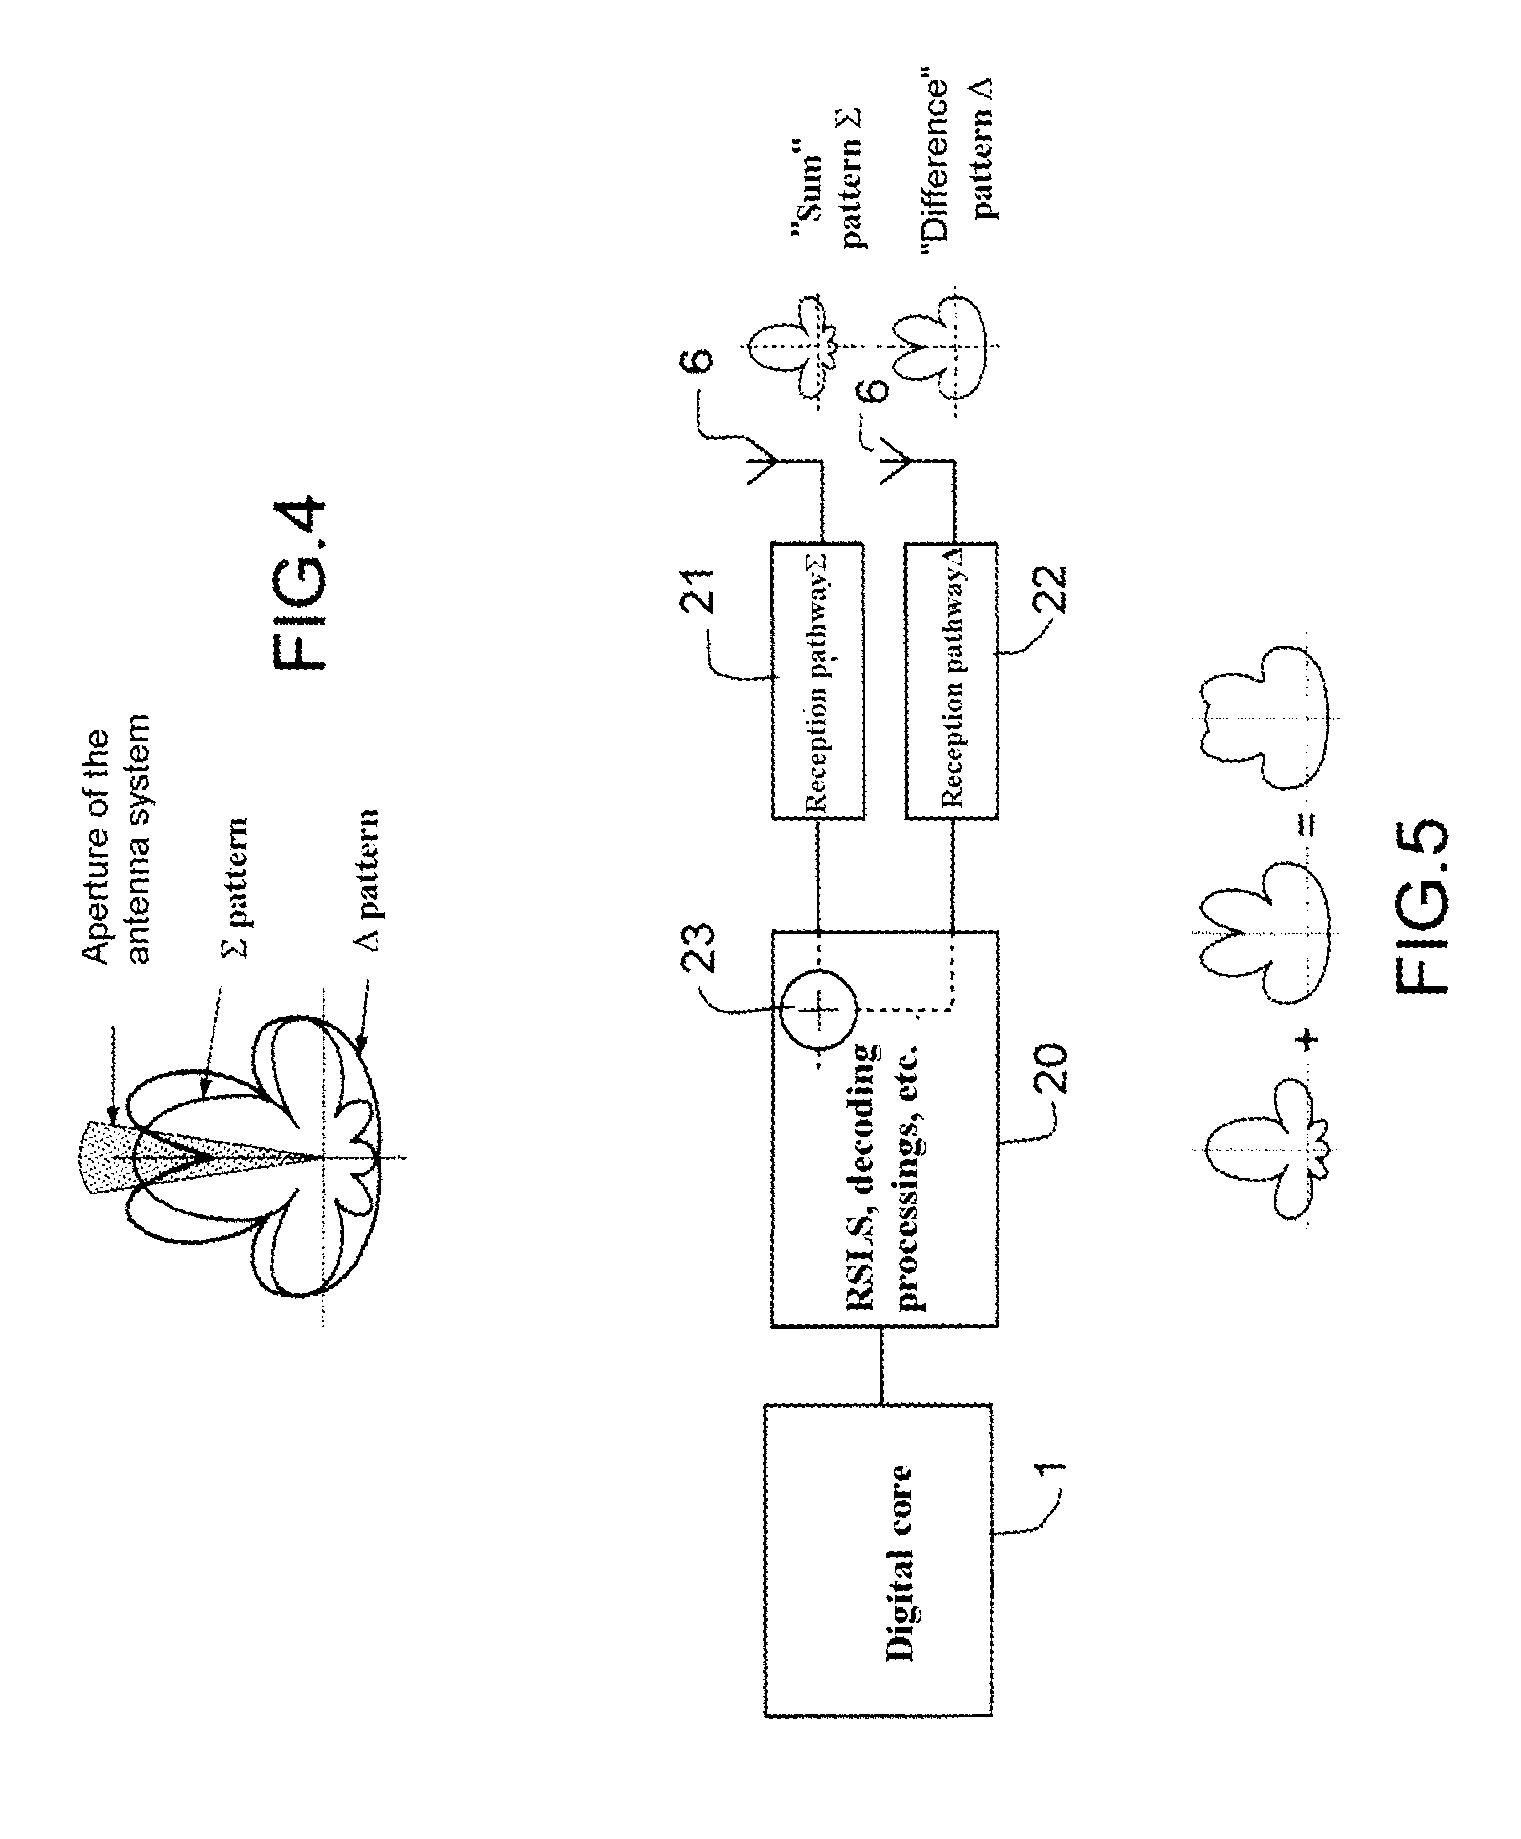 Omnidirectional pseudo-antenna for interrogator or system allowing the interrogation response and/or passive listening functions